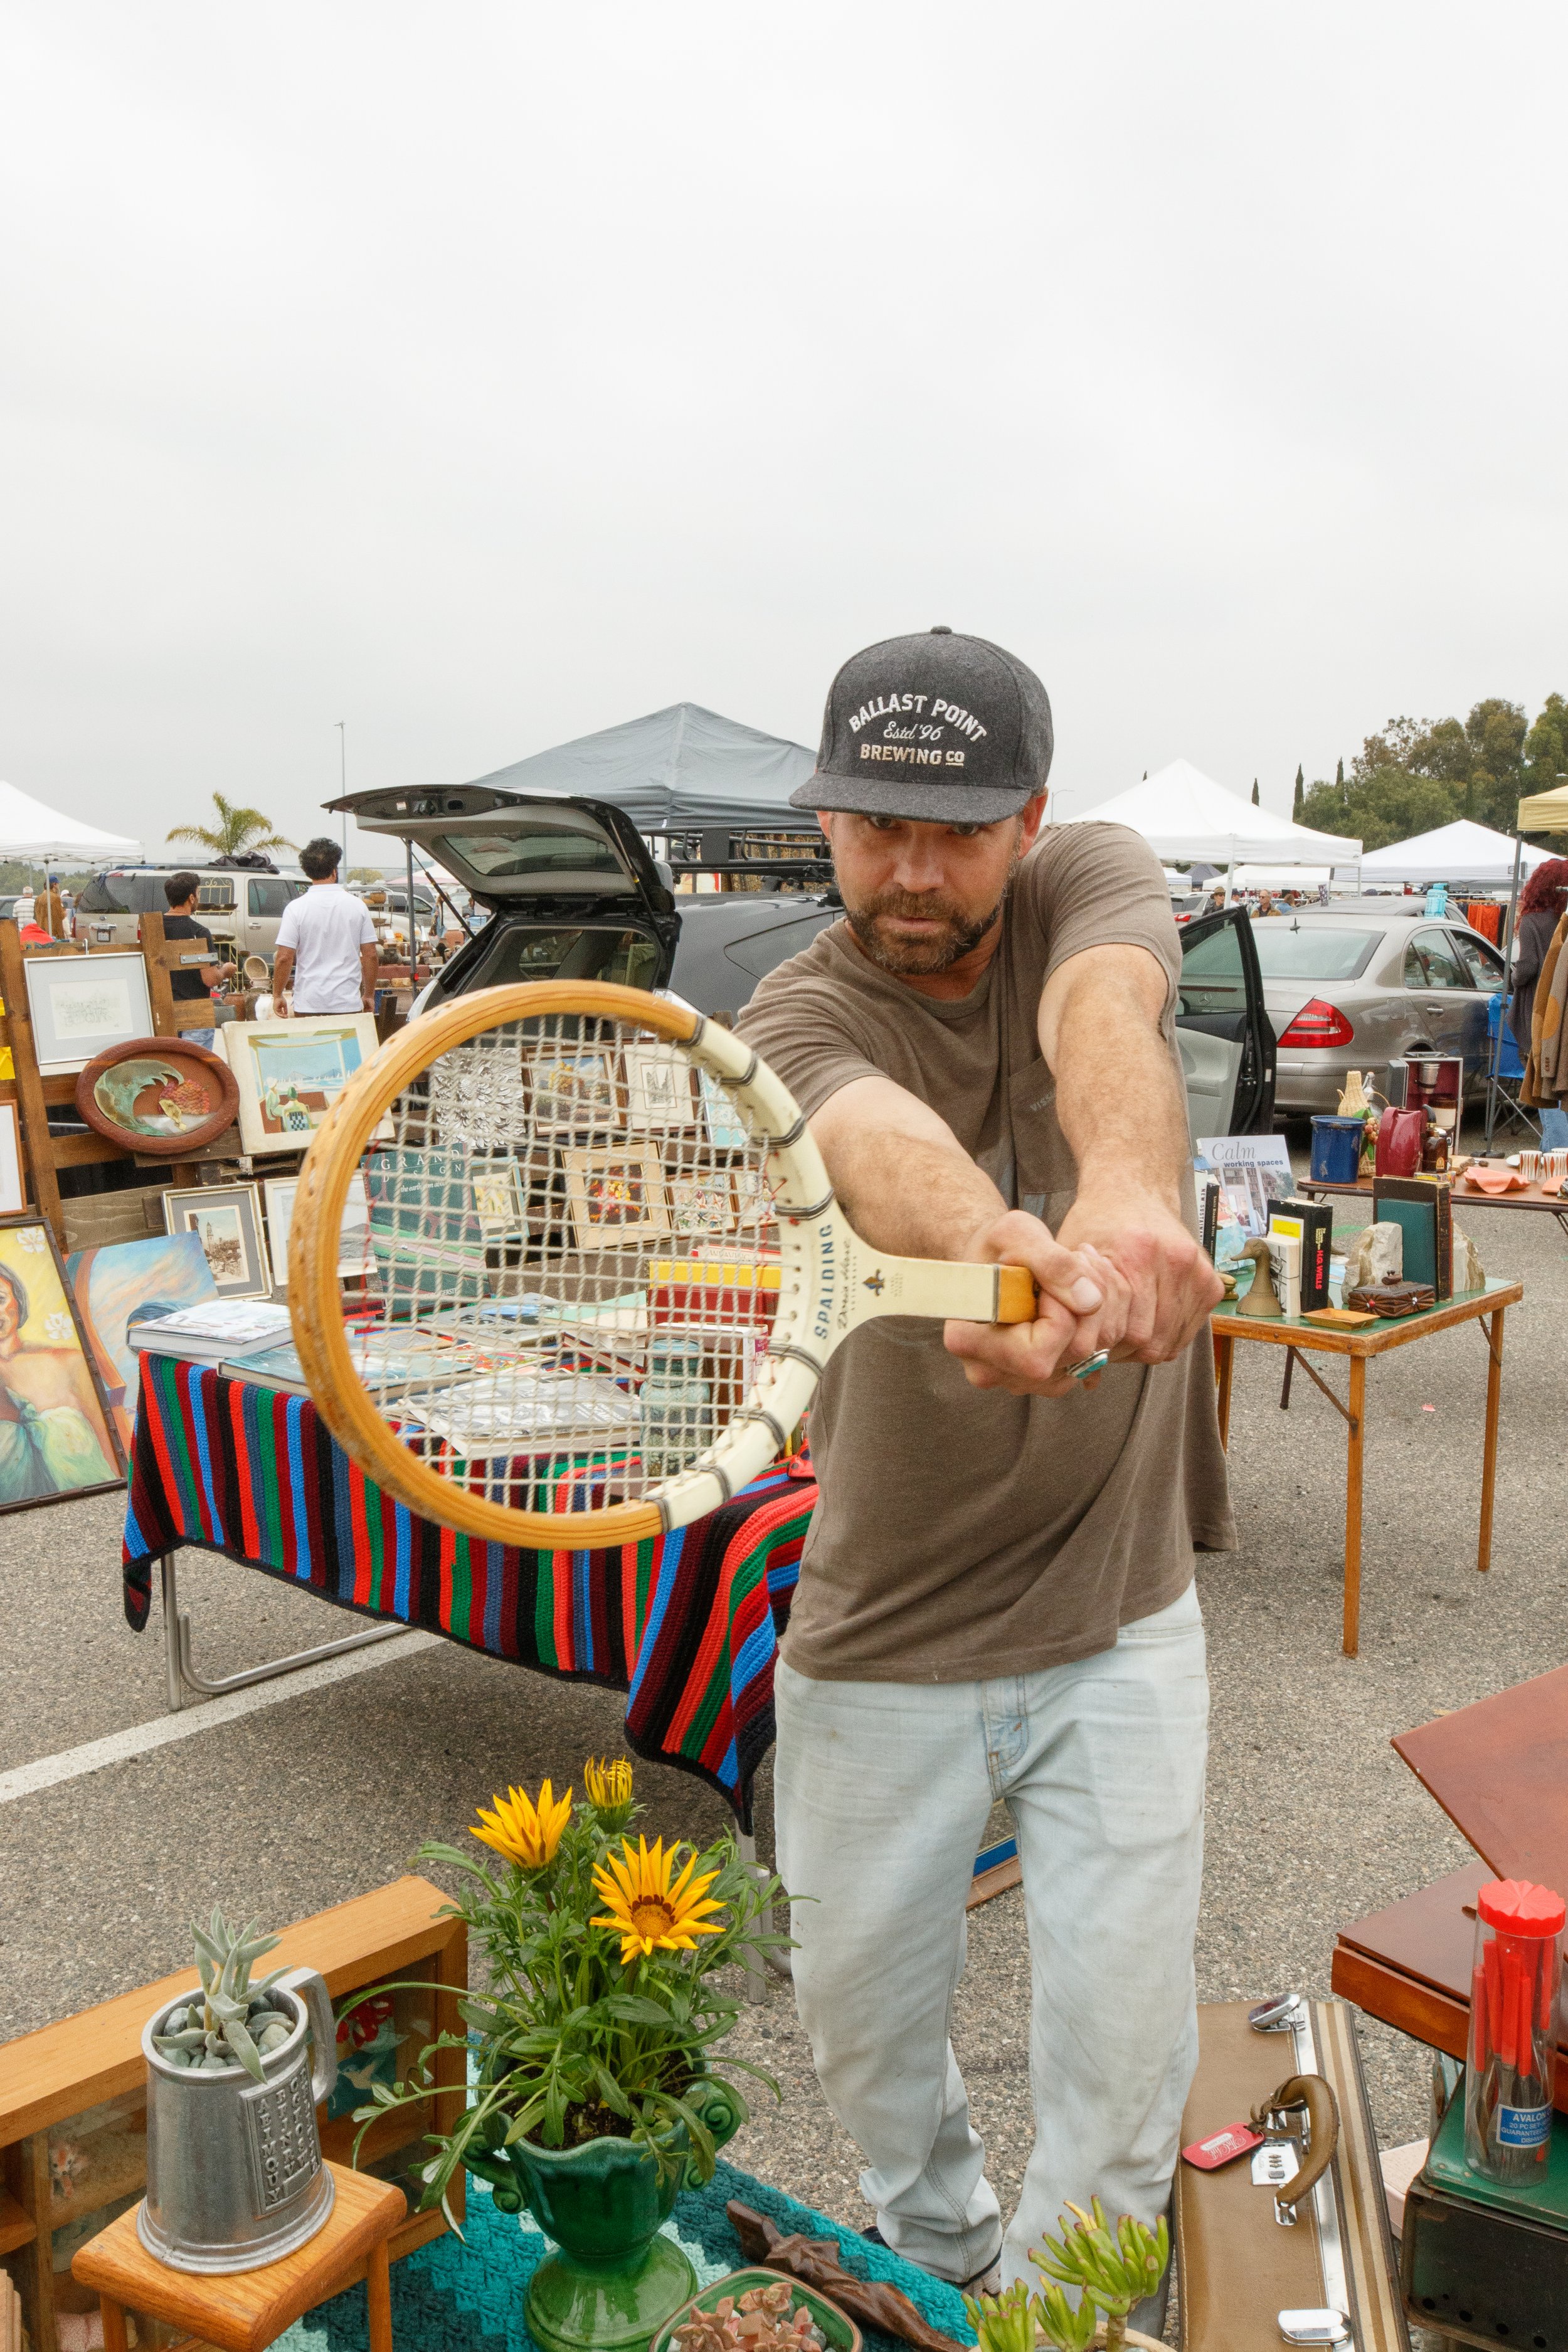  Ryan Meline has been coming to this market for three years and describe his experience as peacful and excting to "see returning clients with smiles and piles of money".May 28,2023 Santa Monica Airport parking lot, CA (Alejandro Contreras | The Corsa